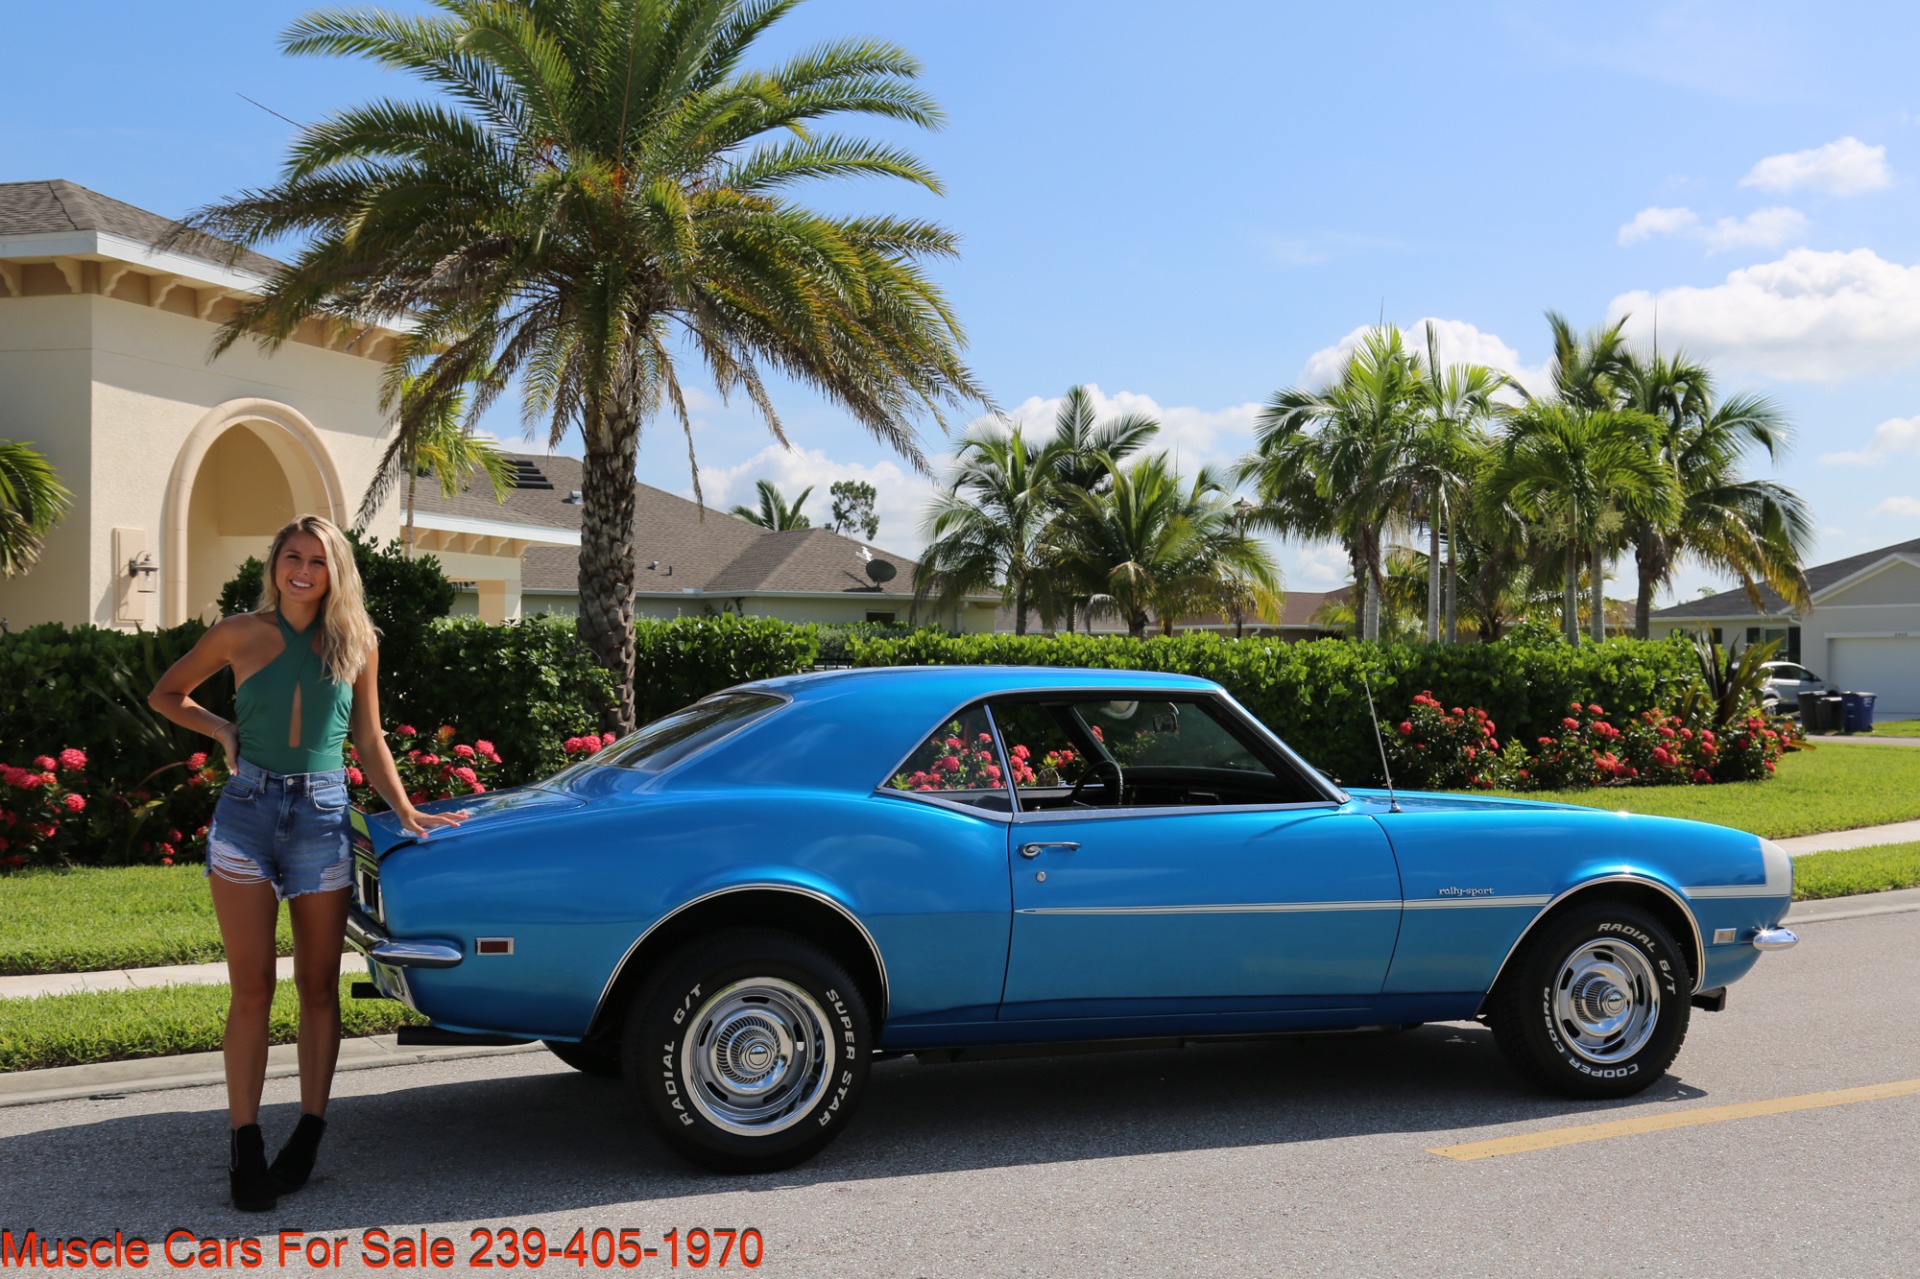 Used 1968 Chevrolet Camaro RS Rallysport 4 Speed Manual V8 for sale Sold at Muscle Cars for Sale Inc. in Fort Myers FL 33912 7